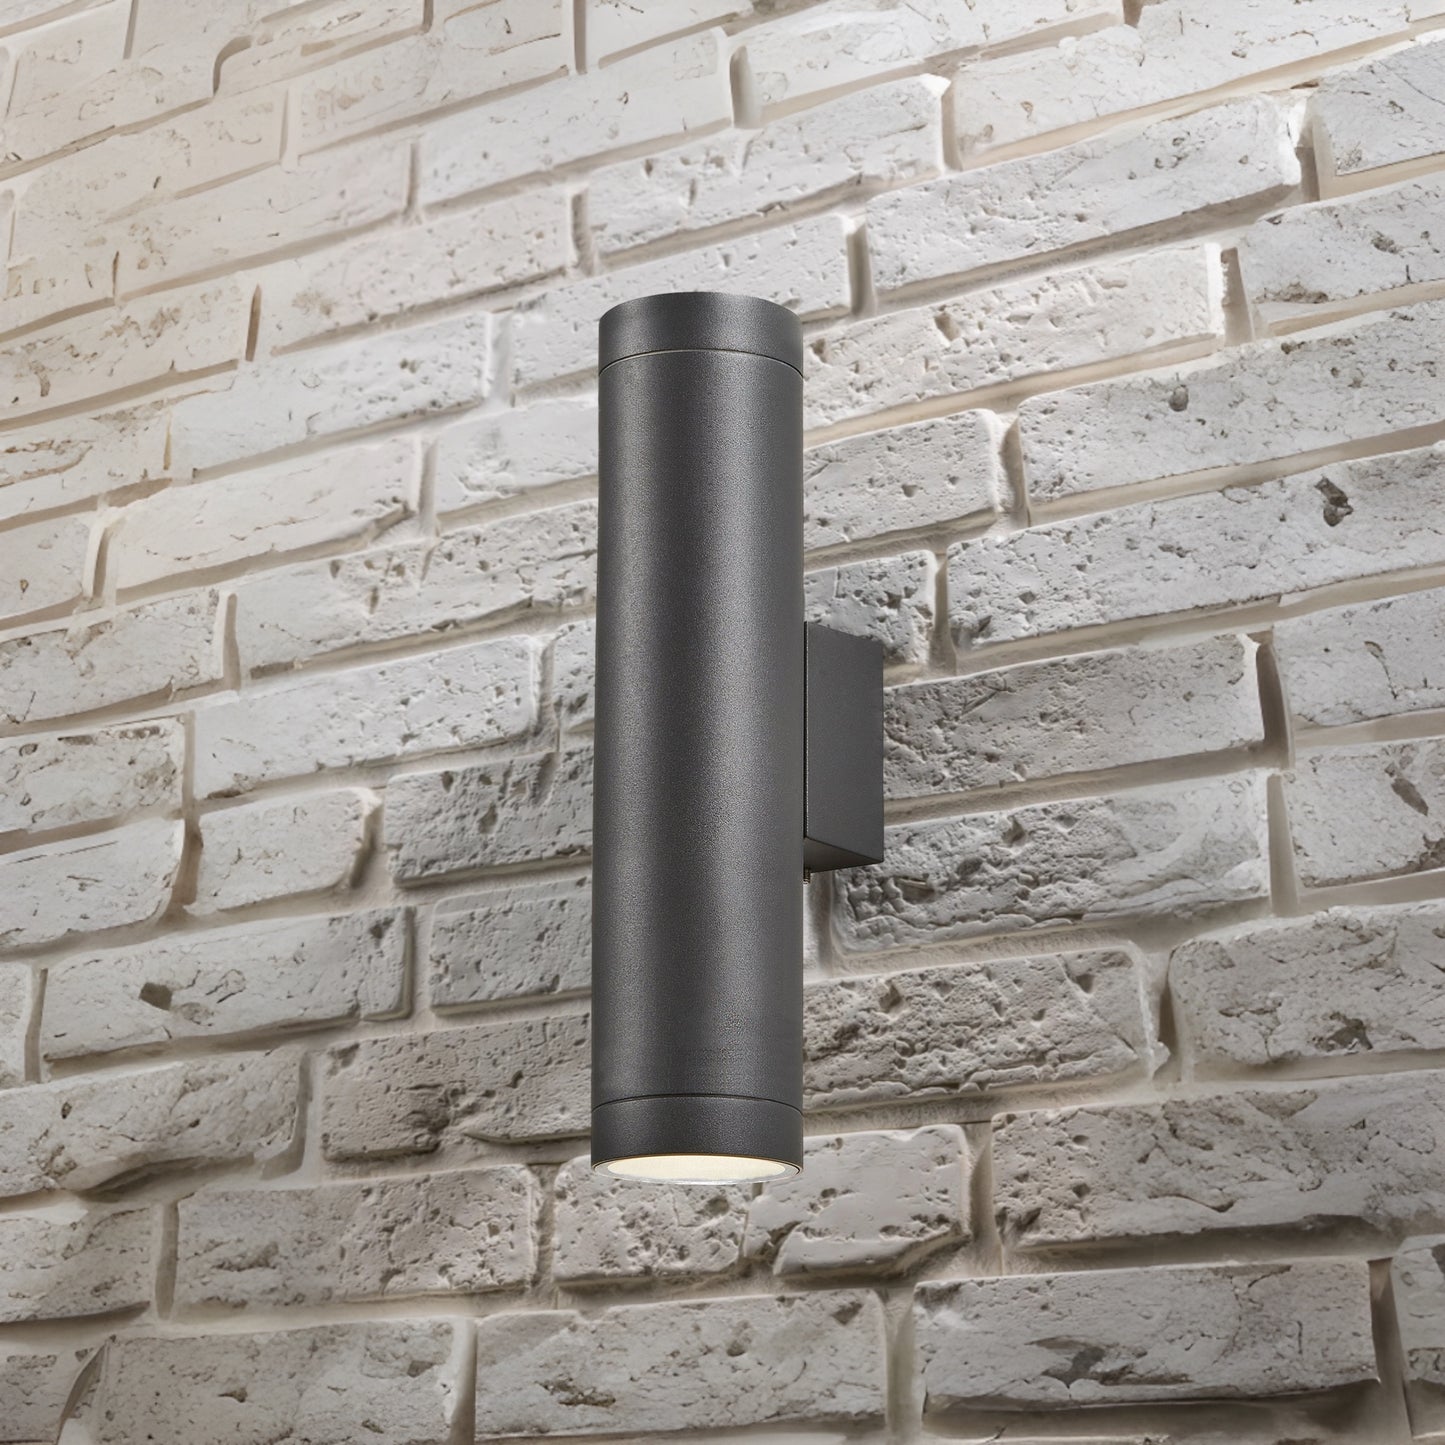 Our Lucas grey anthracite extra long outdoor wall mounted up and down cylinder outdoor light would look perfect in a modern or more traditional home design. Outside wall lights can provide atmospheric light in your garden, at the front door or on the terrace as well as a great security solution. It is designed for durability and longevity with its robust material producing a fully weatherproof and water resistant light fitting.